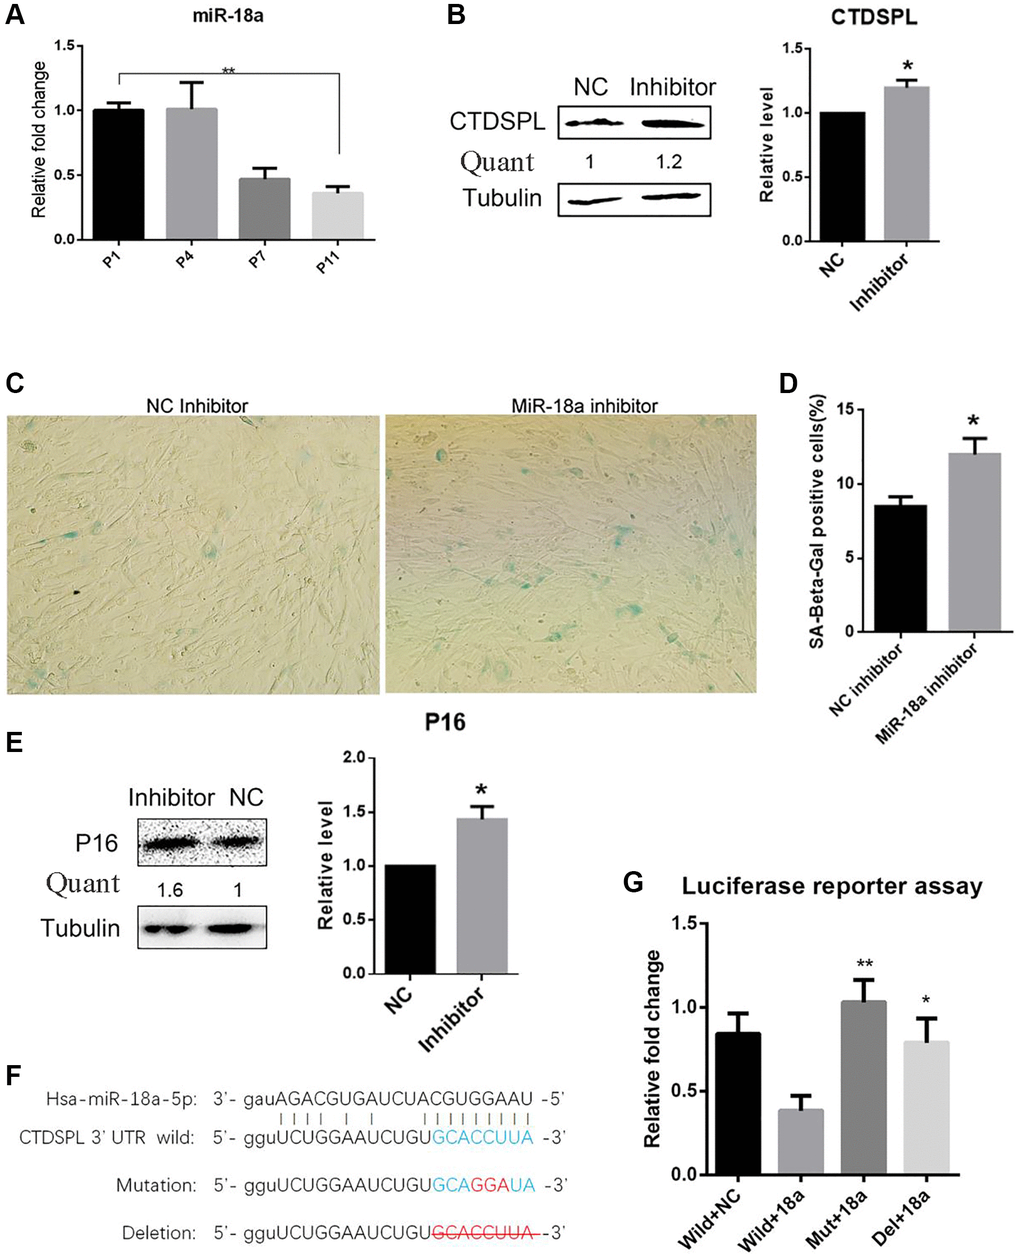 Inhibition of miR-18a-5p induced premature senescence of UCMSCs. (A) Relative expression of miR-18a-5p following passaging was analyzed by quantitate RT-PCR. (B) Western blot assay of CTDSPL expression after miR-NC inhibitor or miR-18a-5p inhibitor transfection. (C) SA-β-gal staining of UCMSCs transfected with miR-NC inhibitor or miR-18a-5p inhibitor. (D) SA-β-gal positive cells were quantified (n = 3). (E) Western blot assay of p16 expression in UCMSCs after miR-NC or miR-18a-5p inhibitor transfection. (F) Schematic representation of the reporter plasmids psiCHECK2-CTDSPL-3UTR-Wild, psiCHECK2-CTDSPL-3UTR-Mutation and psiCHECK2-CTDSPL-3UTR-Delation. (G) Luciferase reporter assay was performed to verify the direct repression of CTDSPL by miR-18a-5p. *p **p 